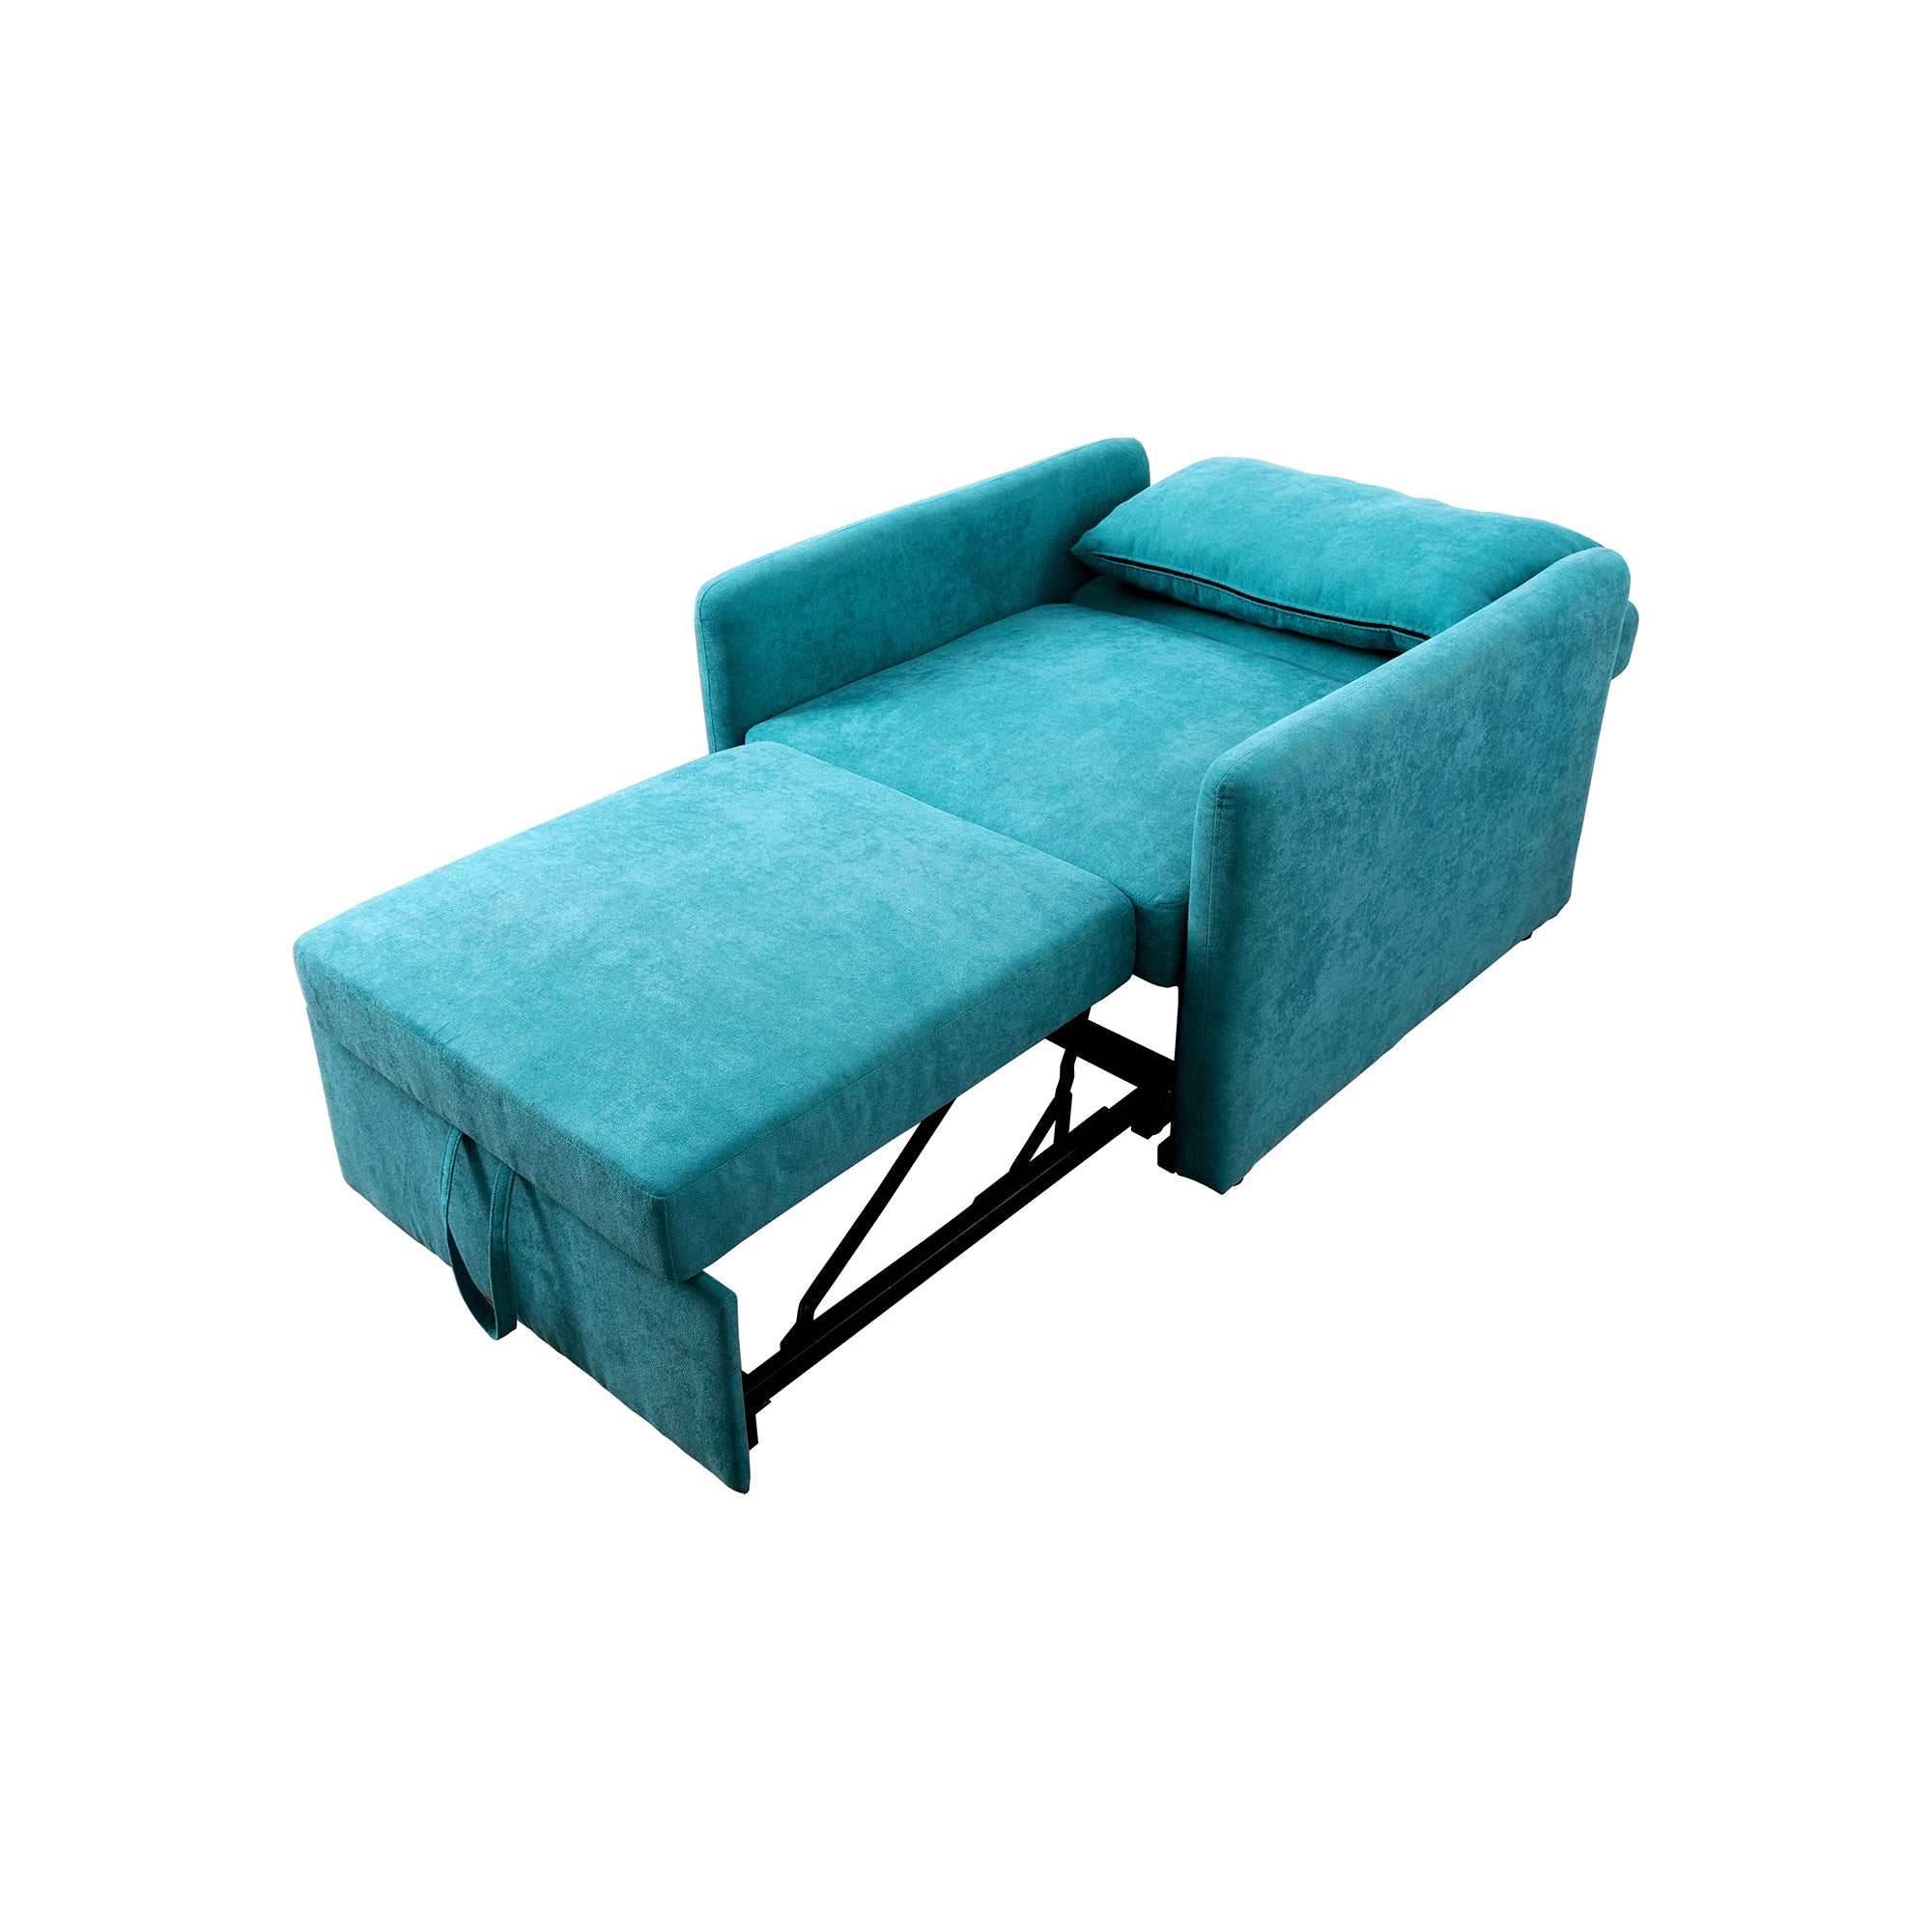 Ainehome Green Lint foldable Sofa bed